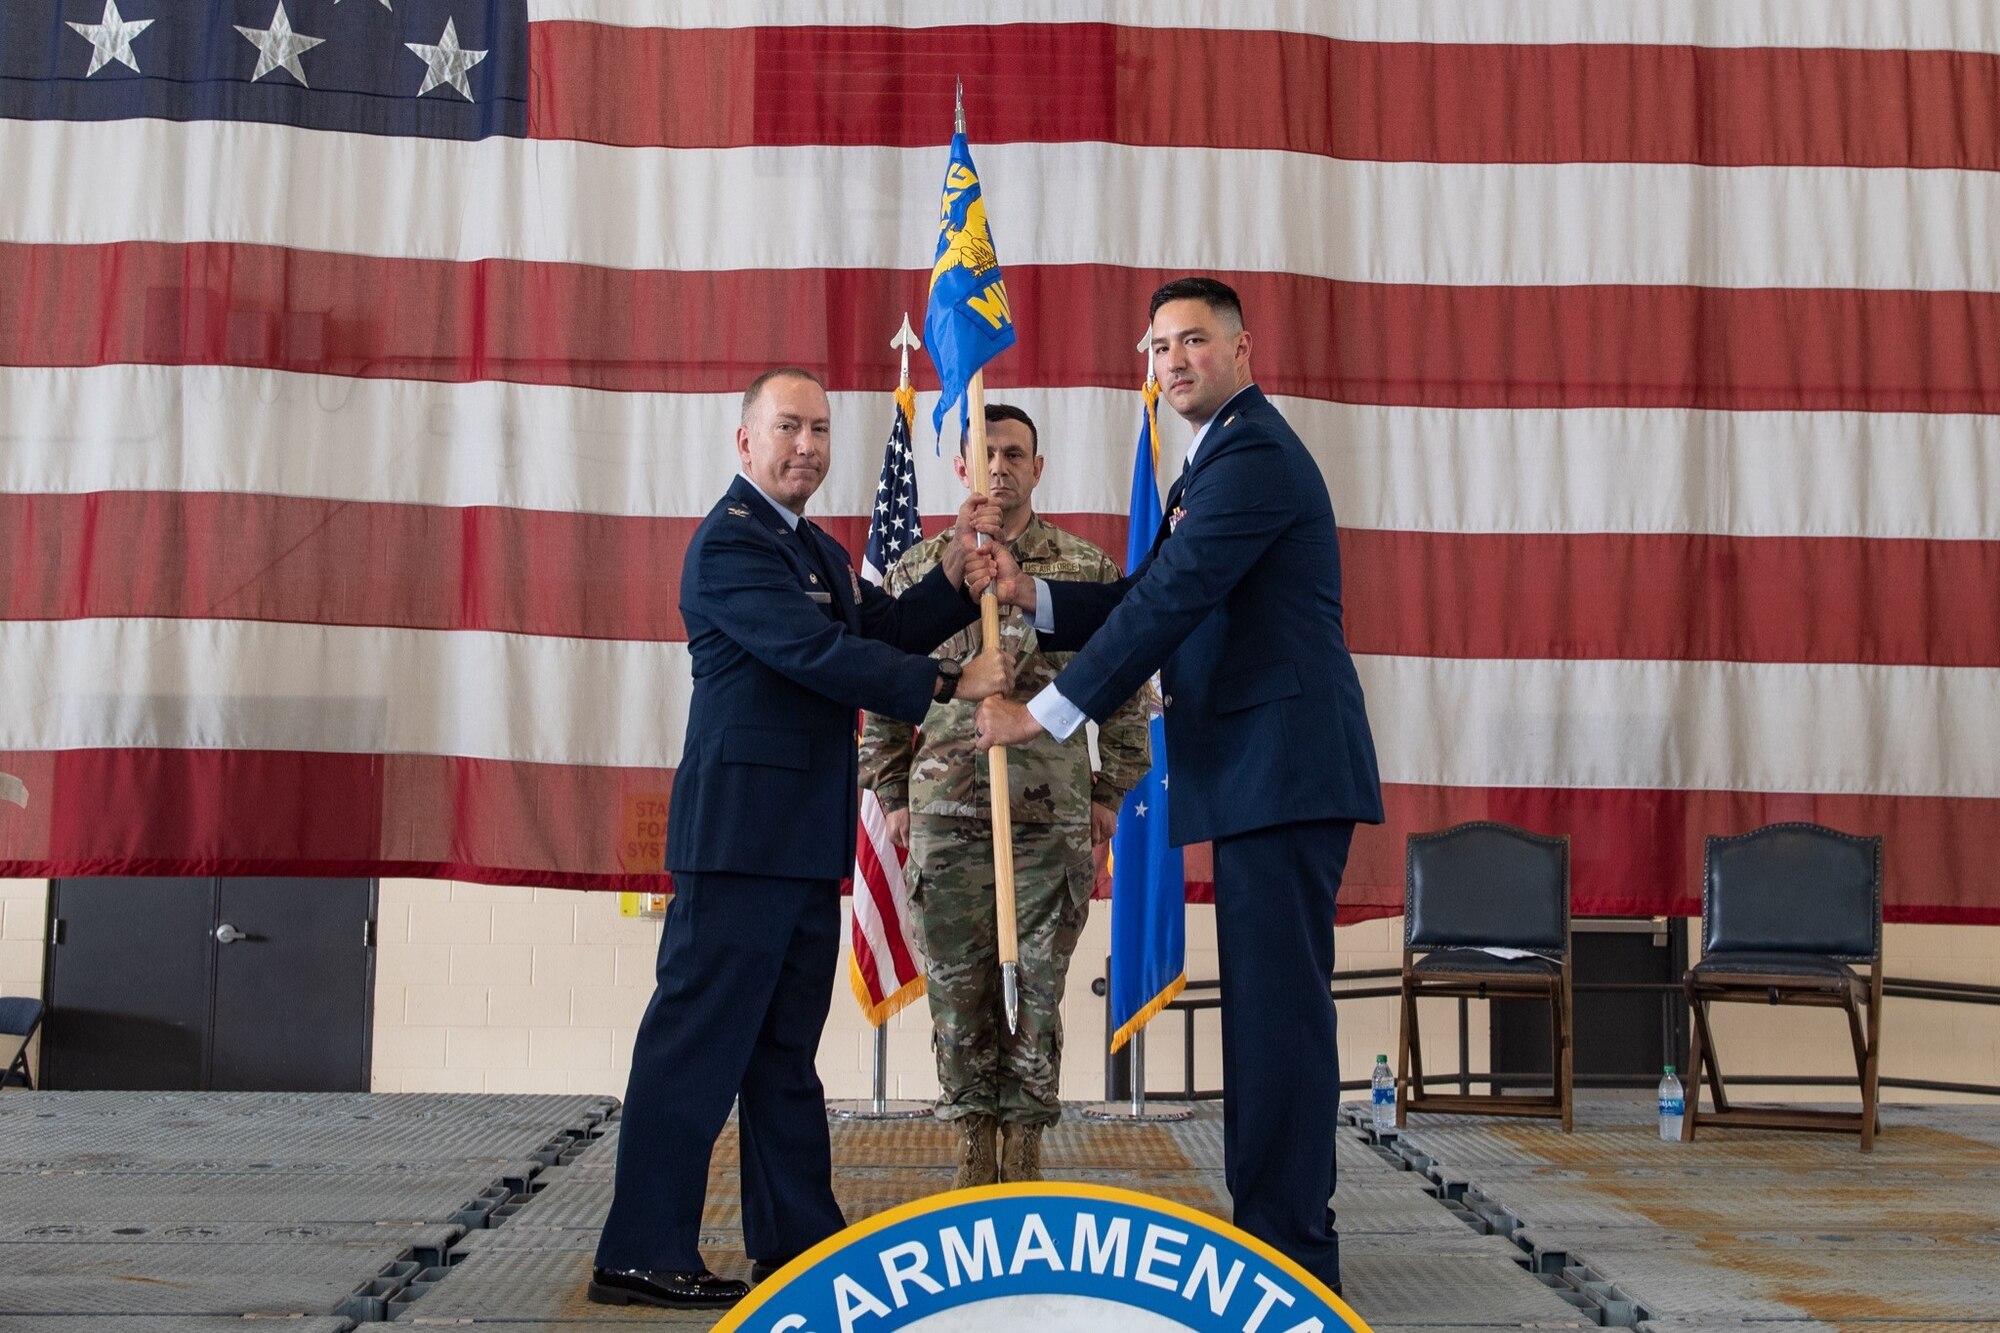 U.S. Air Force Maj. William Hichney, 23d Munitions Squadron commander, takes the command guidon from Col. Stephen Harvey, 23d Maintenance Group commander, July 1, 2021, at Moody Air Force Base, Georgia. The 23d MUNS is being reactivated after 44 years of dormancy. (U.S. Air Force photo by Senior Airman John Crampton)